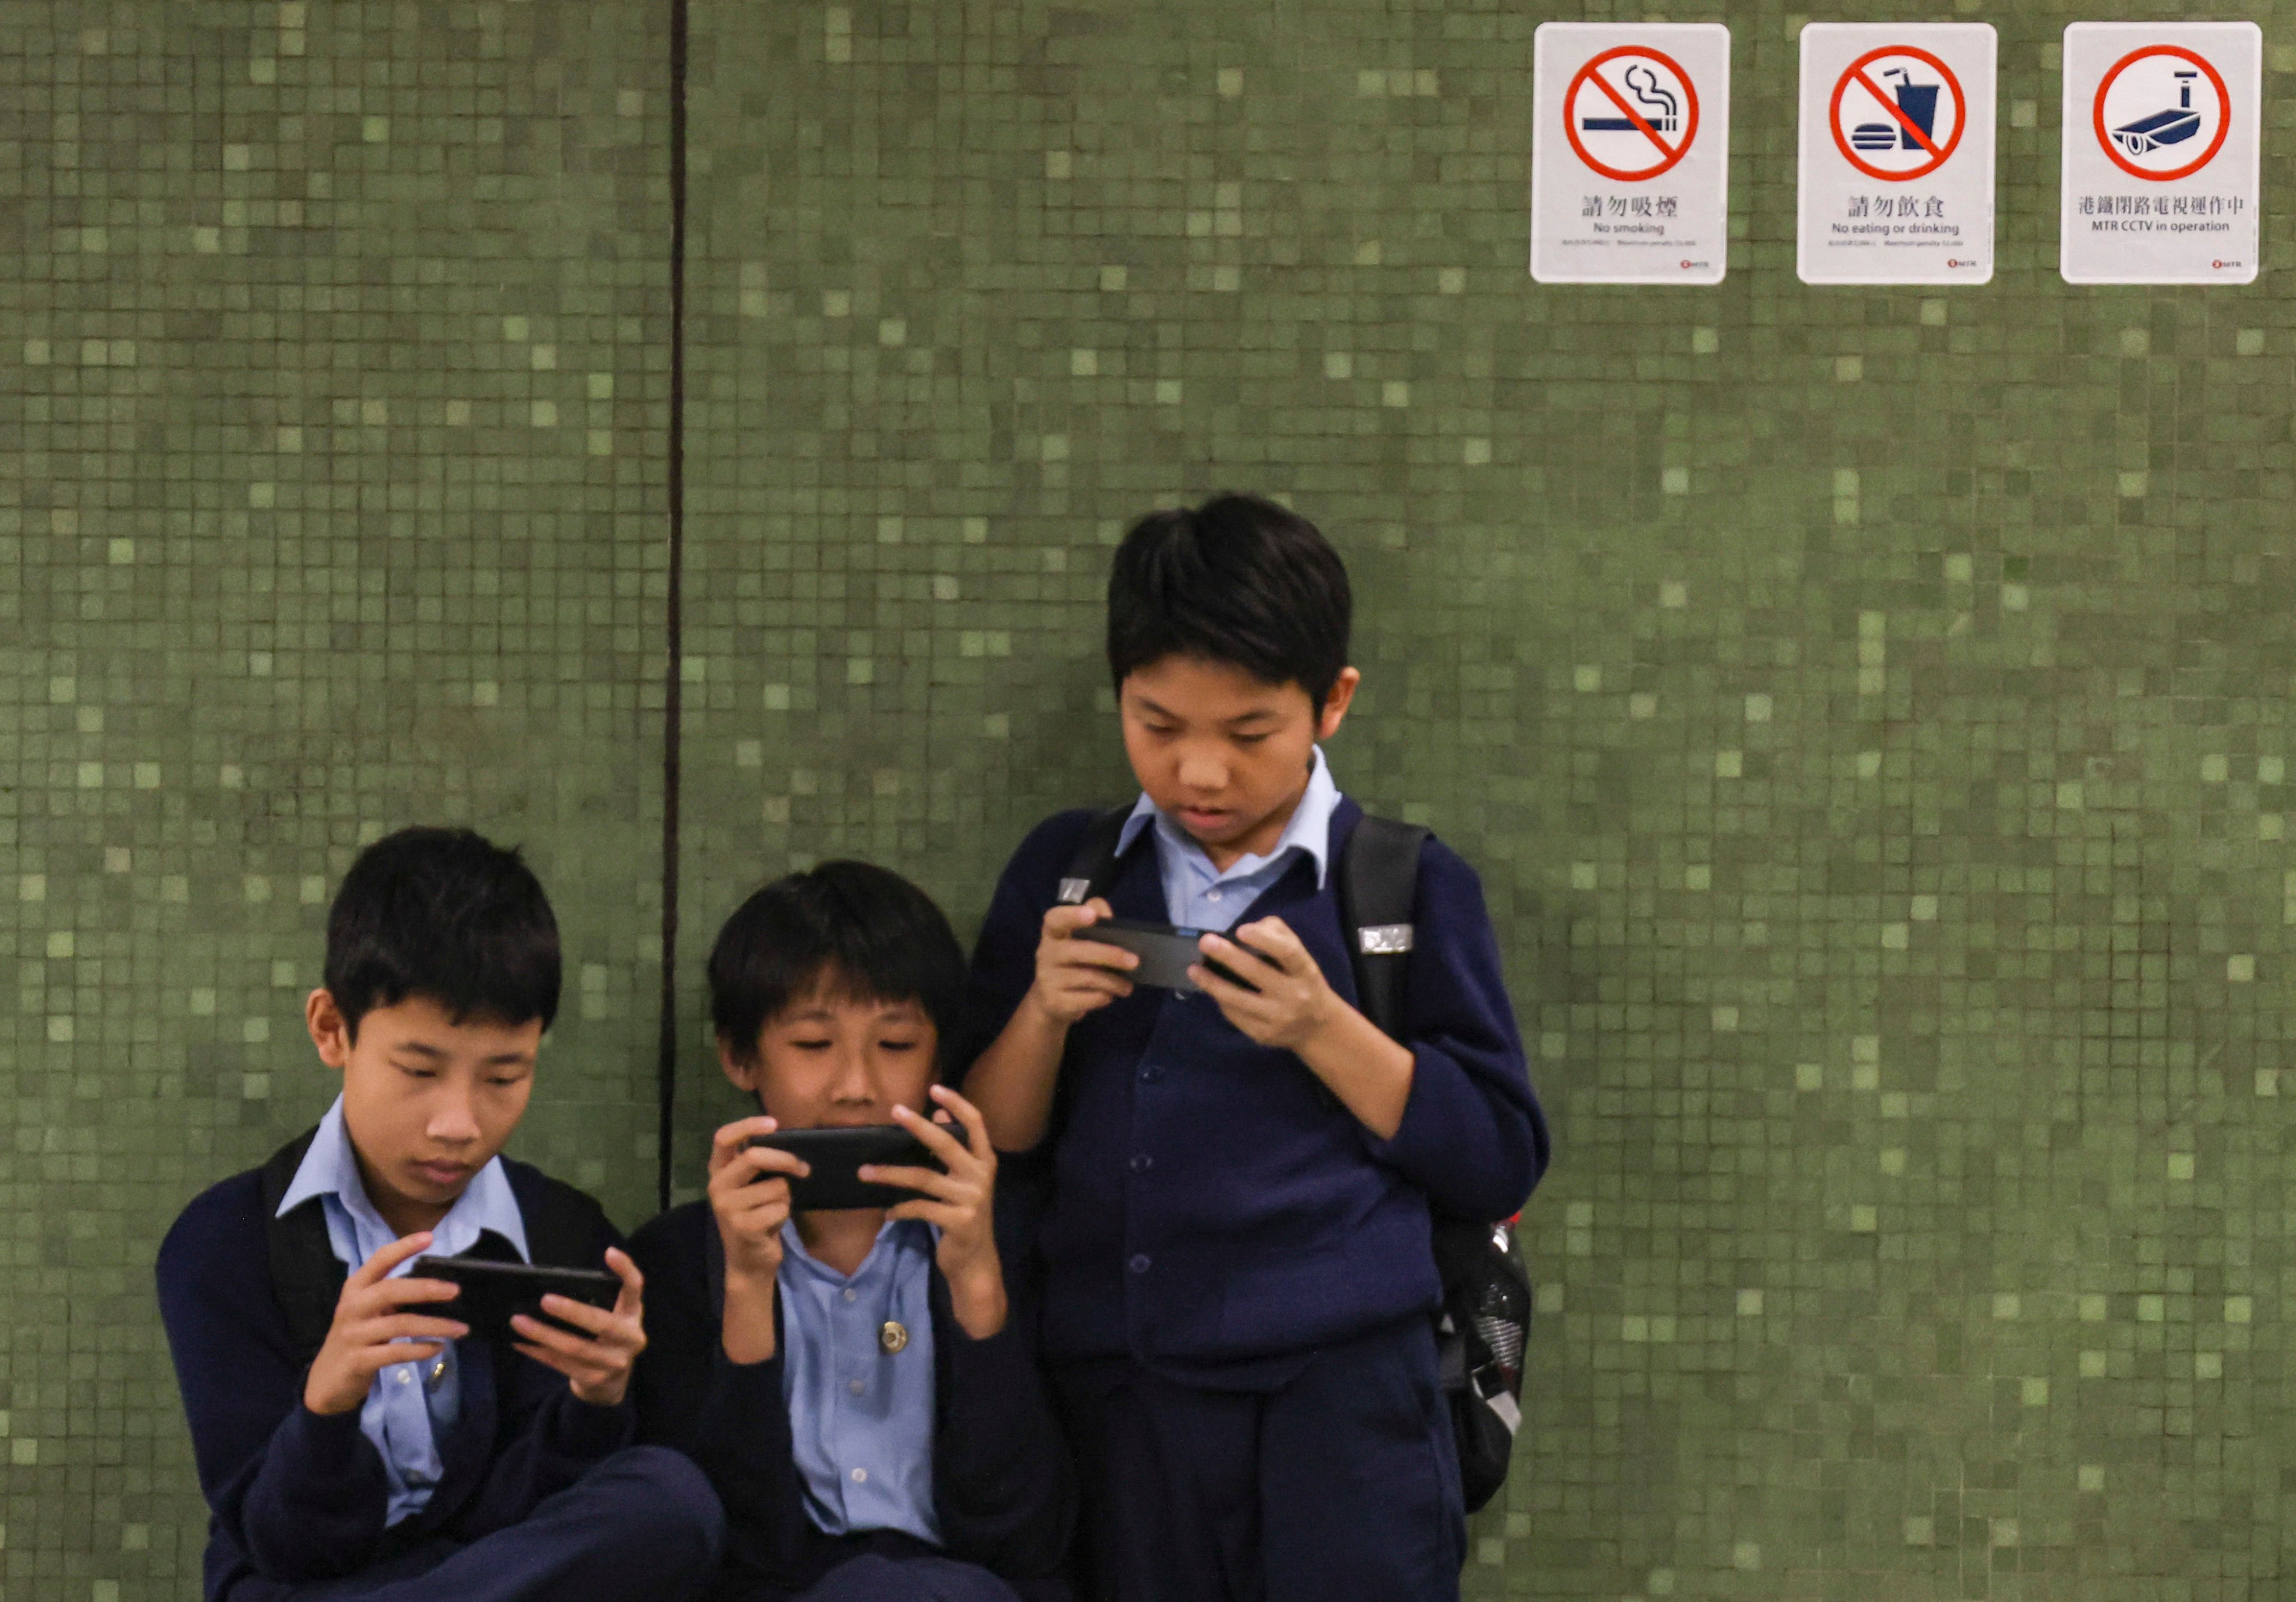 Children on their phones on the platform of Lok Fu MTR station on June 13. The US surgeon general is calling for warning labels to be applied to social media platforms, sparking discussion over the issue in Hong Kong. Photo: Jelly Tse